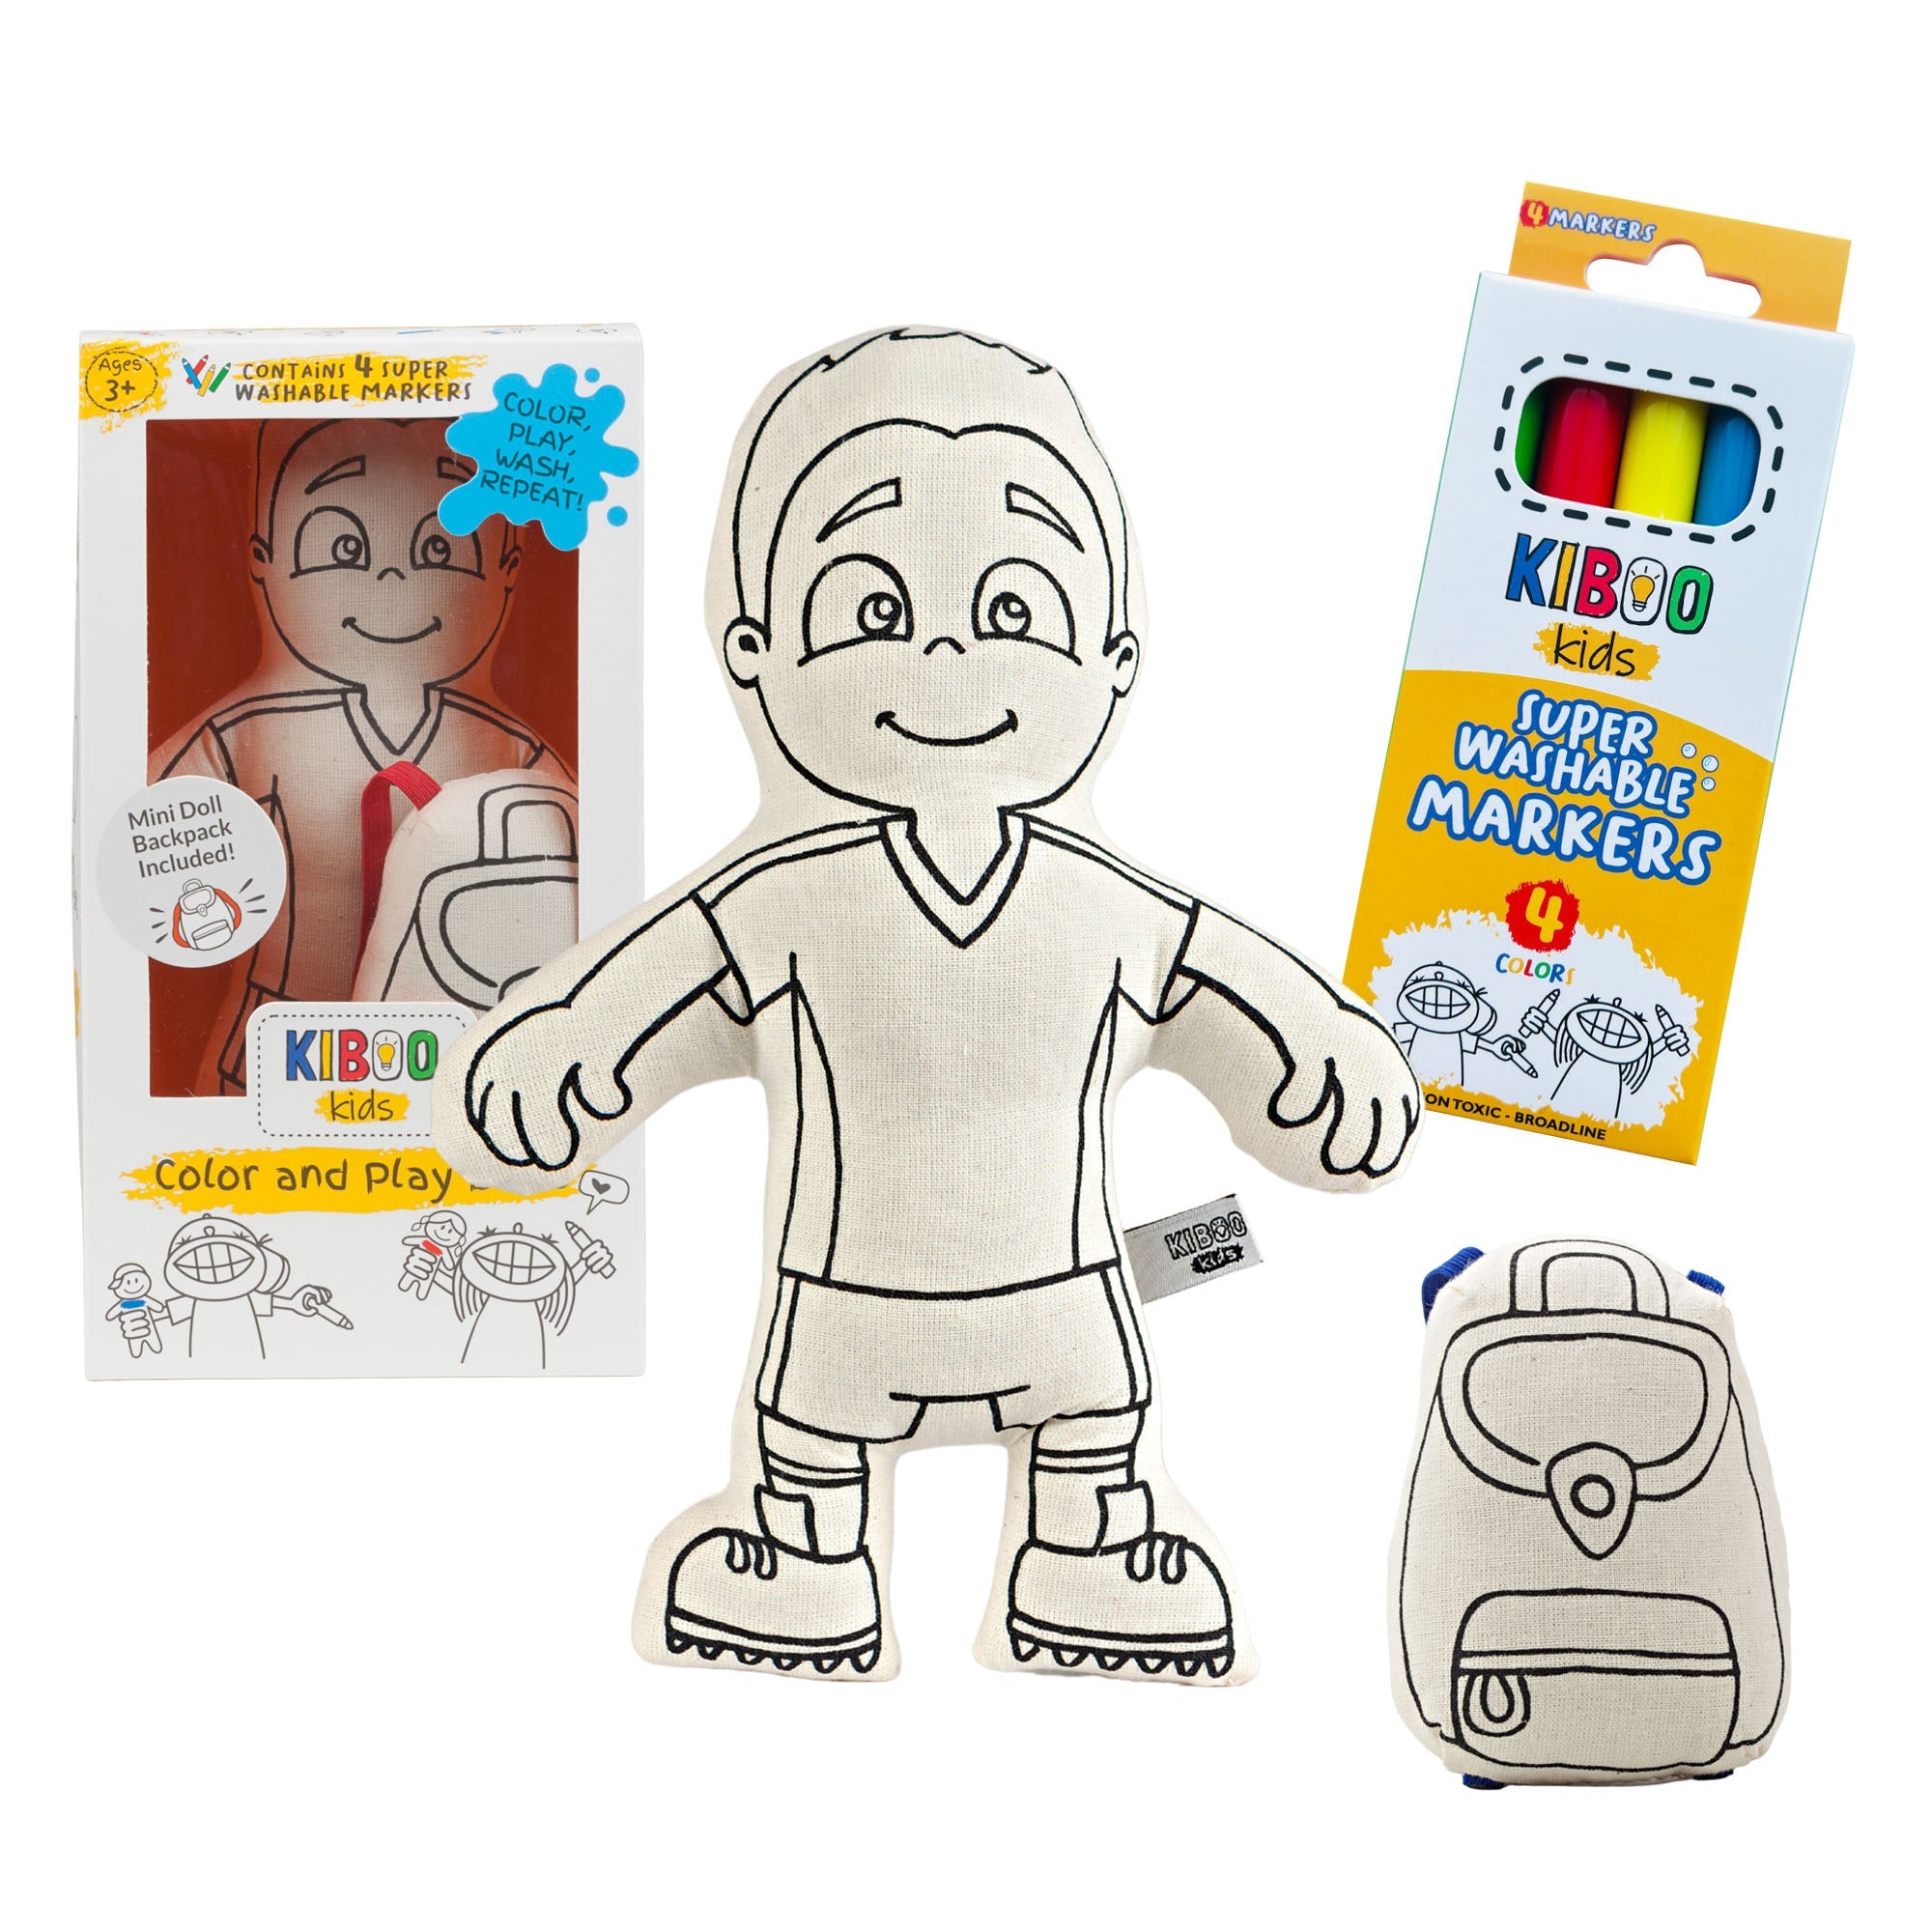 Kiboo Kids Soccer Series: Soccer Boy Doll - Colorable And Washable For Creative Play